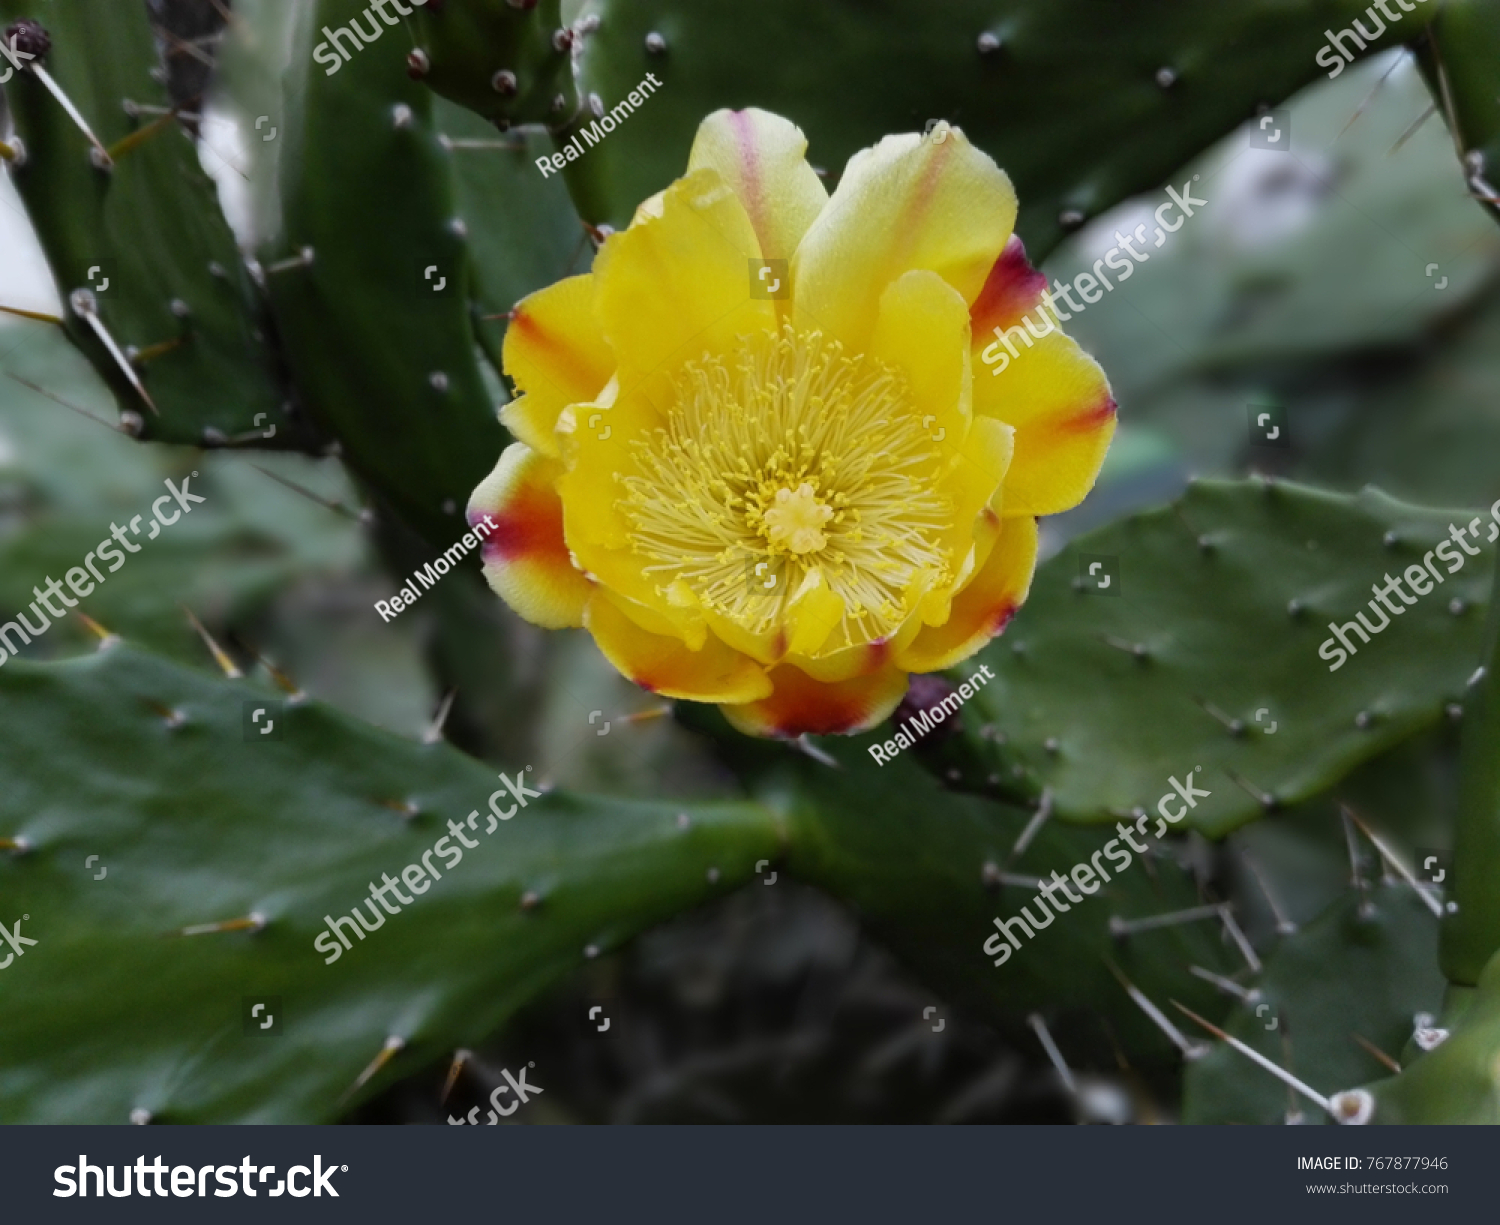 Wild prickly pear cactus or paddle cactus yellow flower in spring desert near beach, Greece. Desert cactus yellow flower macro. Desert landscape with yellow flower close up on cacti green background #767877946